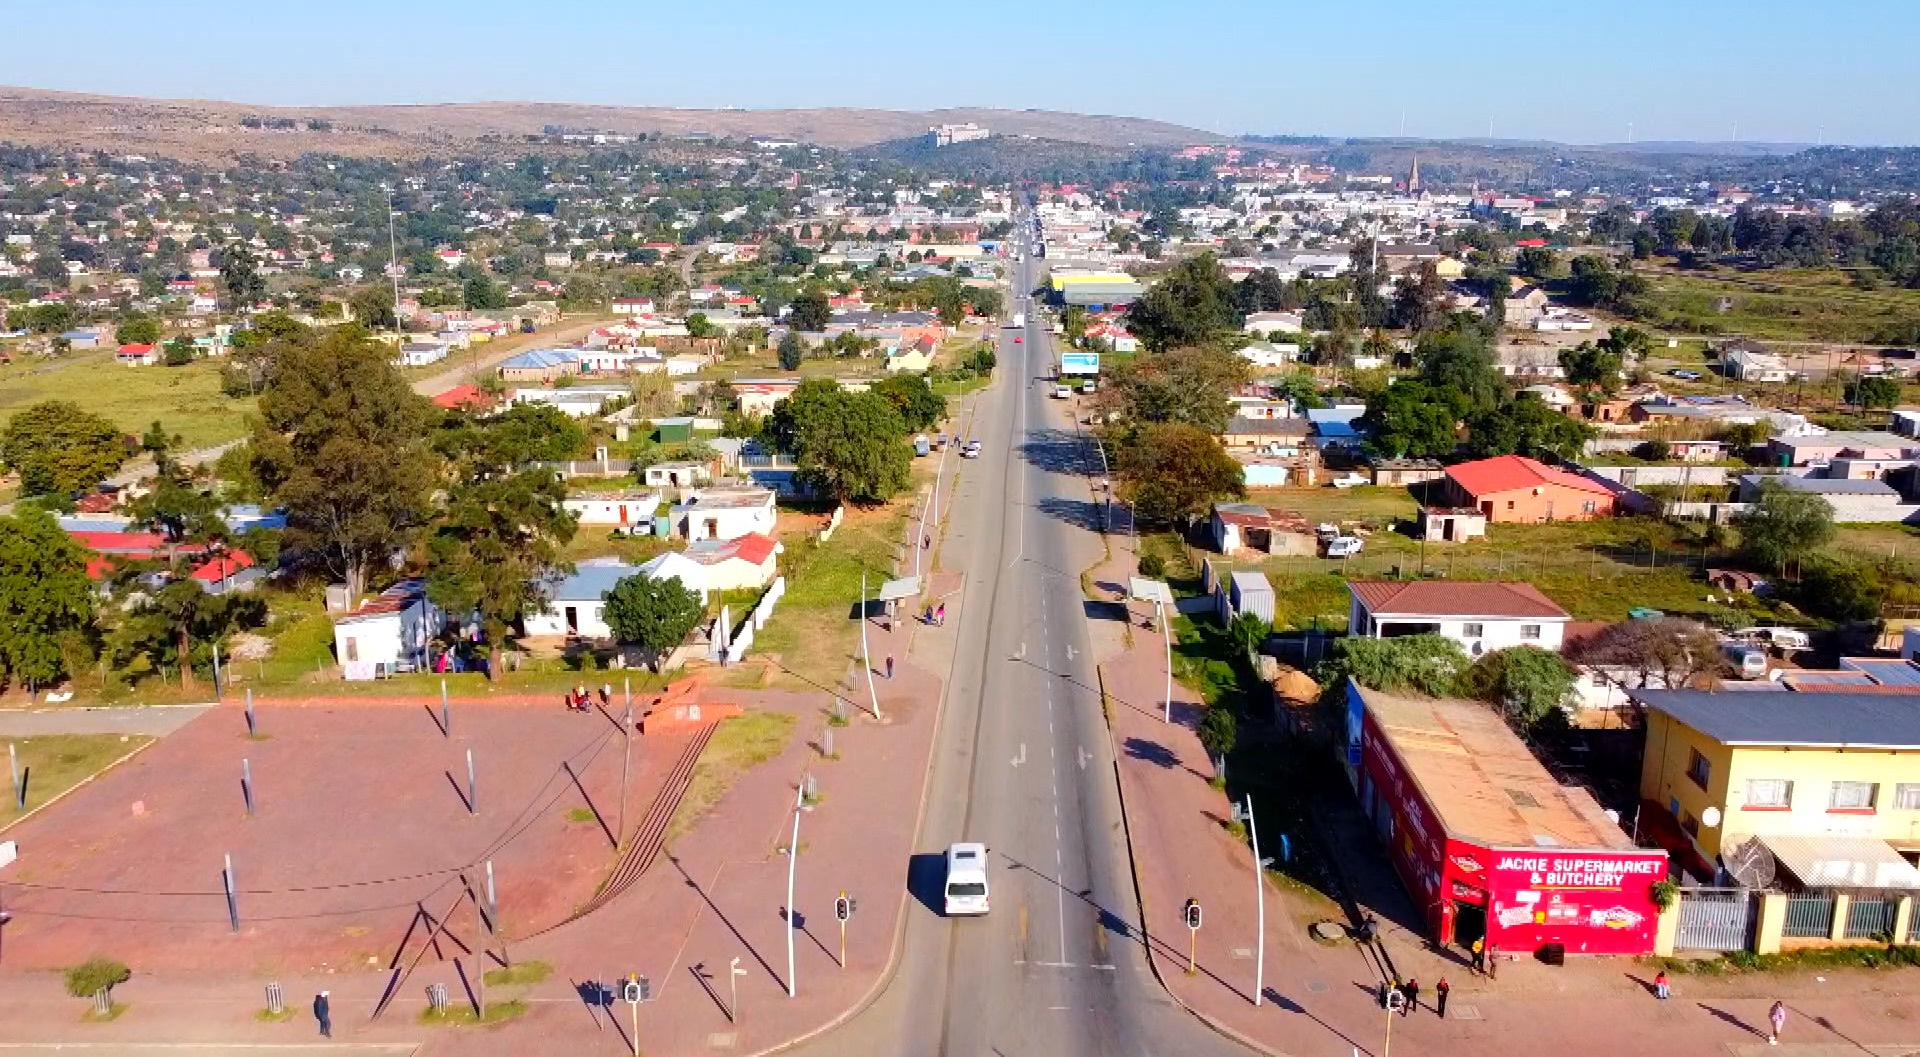 An image of Makhanda showing a road, buildings and trees